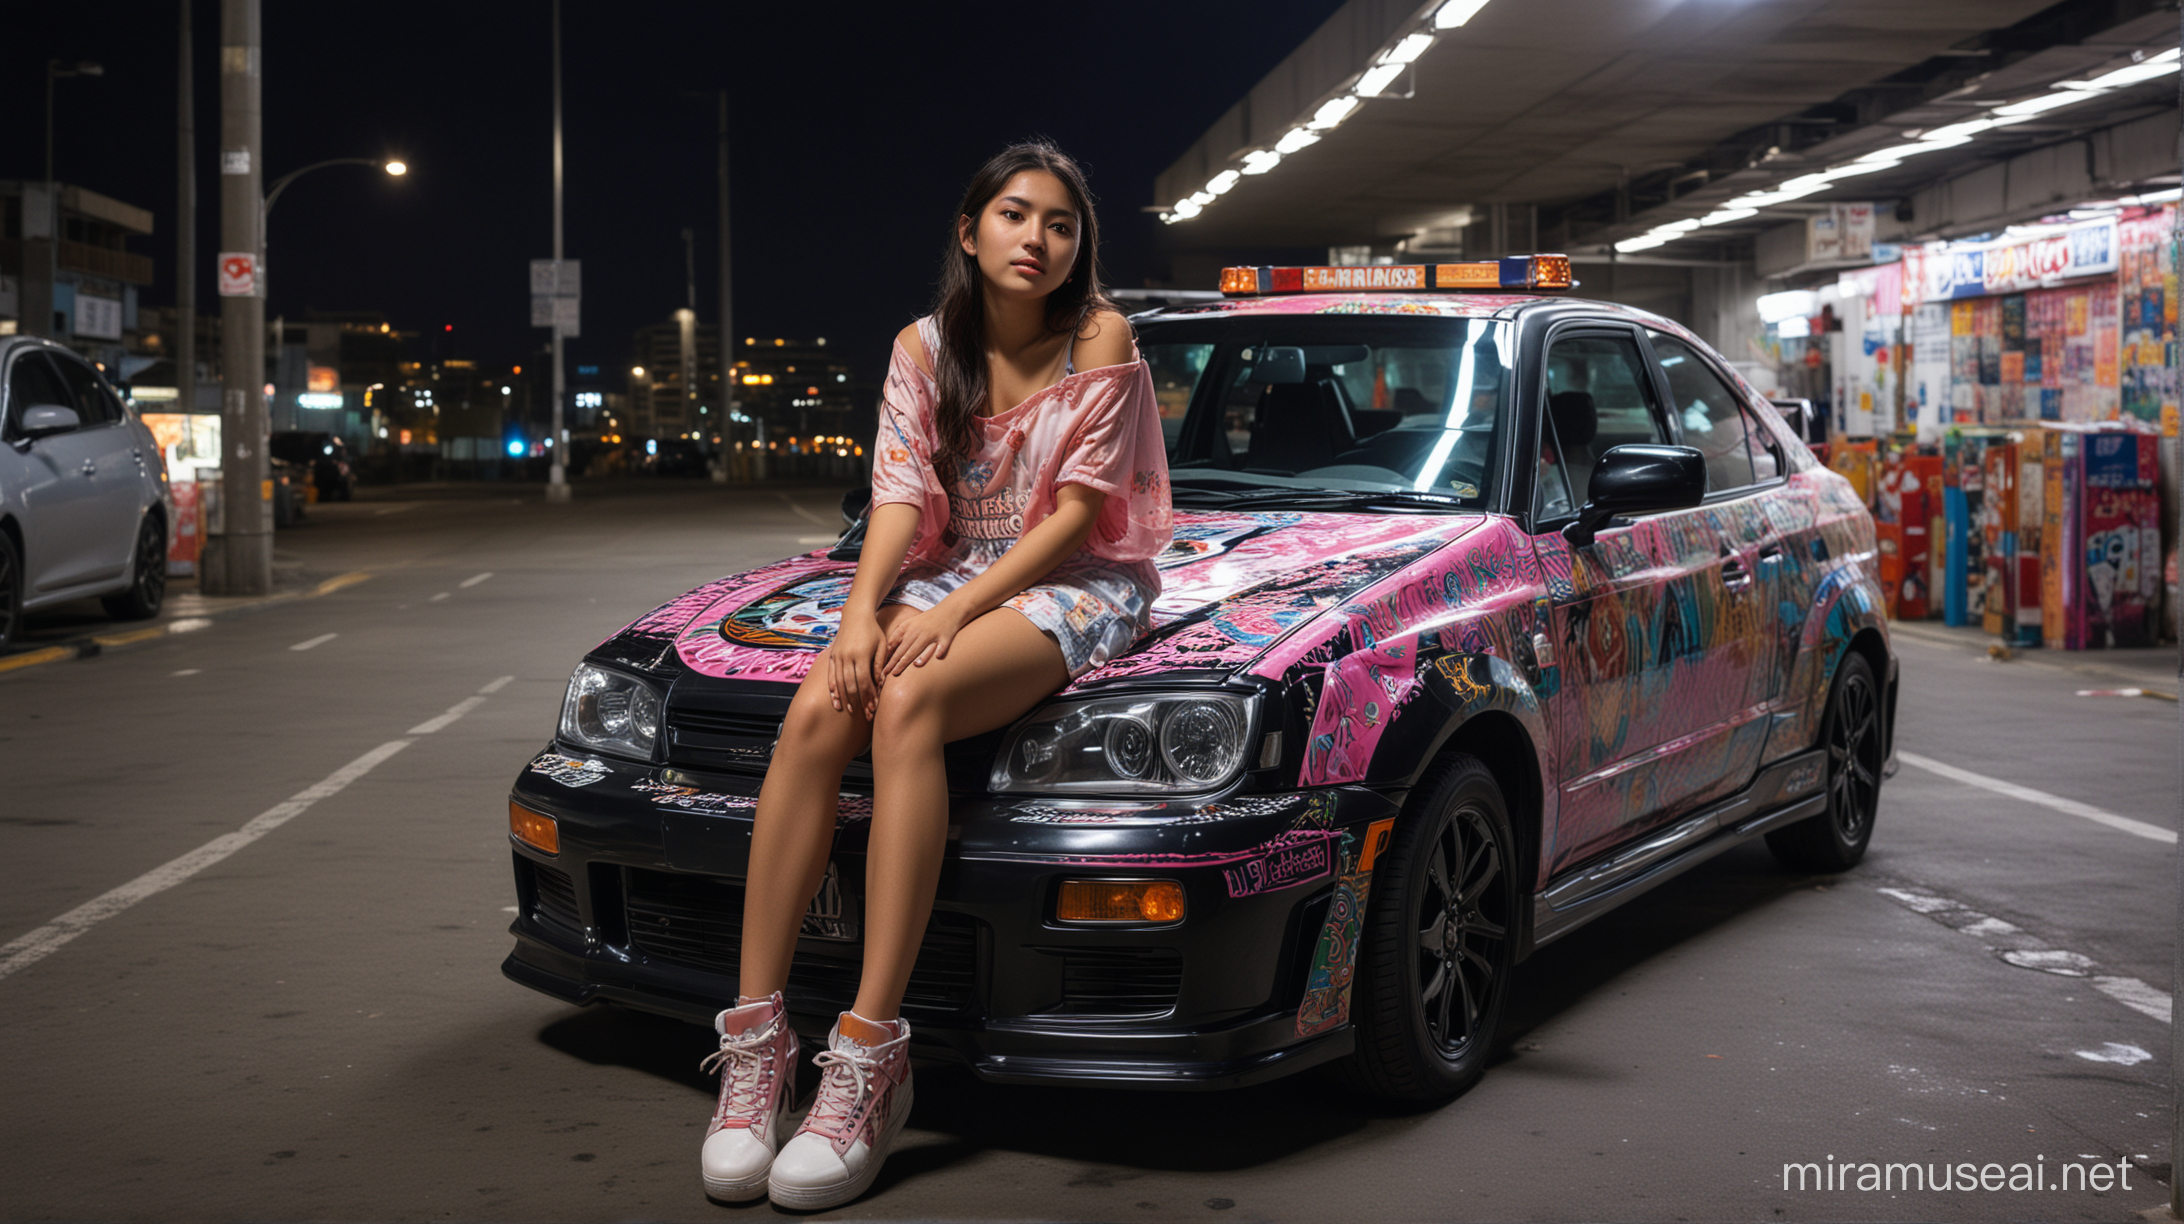 A mexican girl,  sitting on the hood of an Itasha-style car, in an underground parking lot, illuminated with dim neon light, at night, 